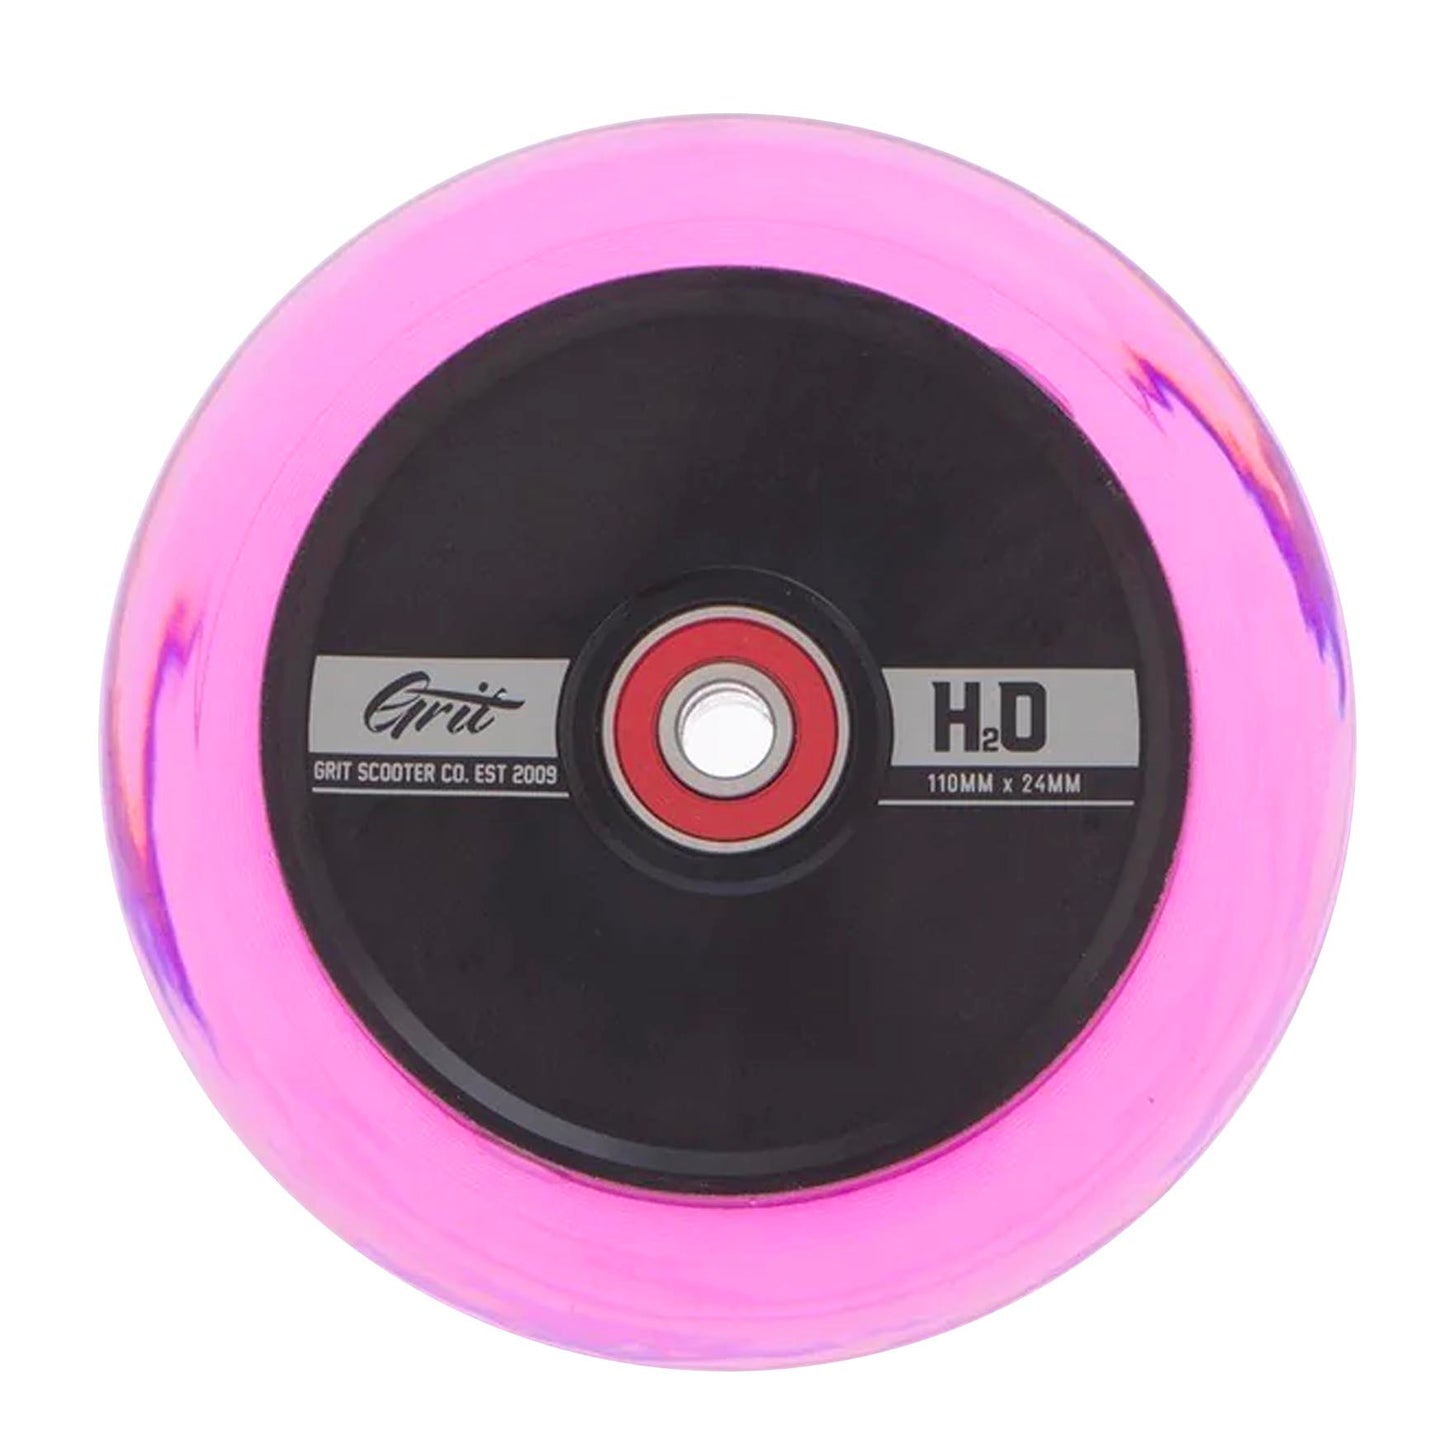 Grit Scooters Hollow Core Wheels H2O (Pair)  Black / Pink 110mm x 24mm - Prime Delux Store